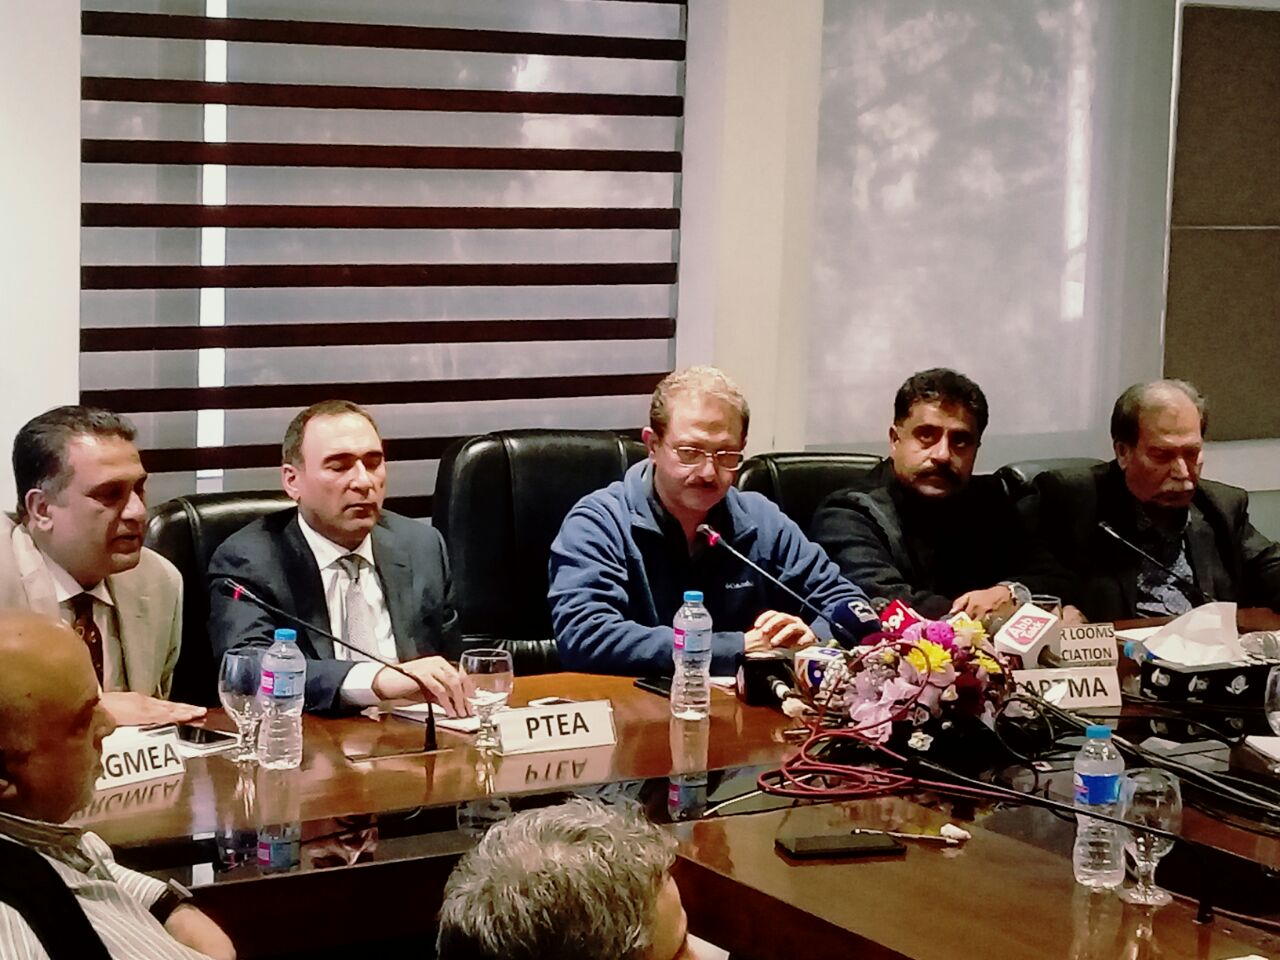 https://aptma.org.pk/wp-content/uploads/2021/10/Joint-Meeting-of-the-Textile-Industry-Associations-75.jpg